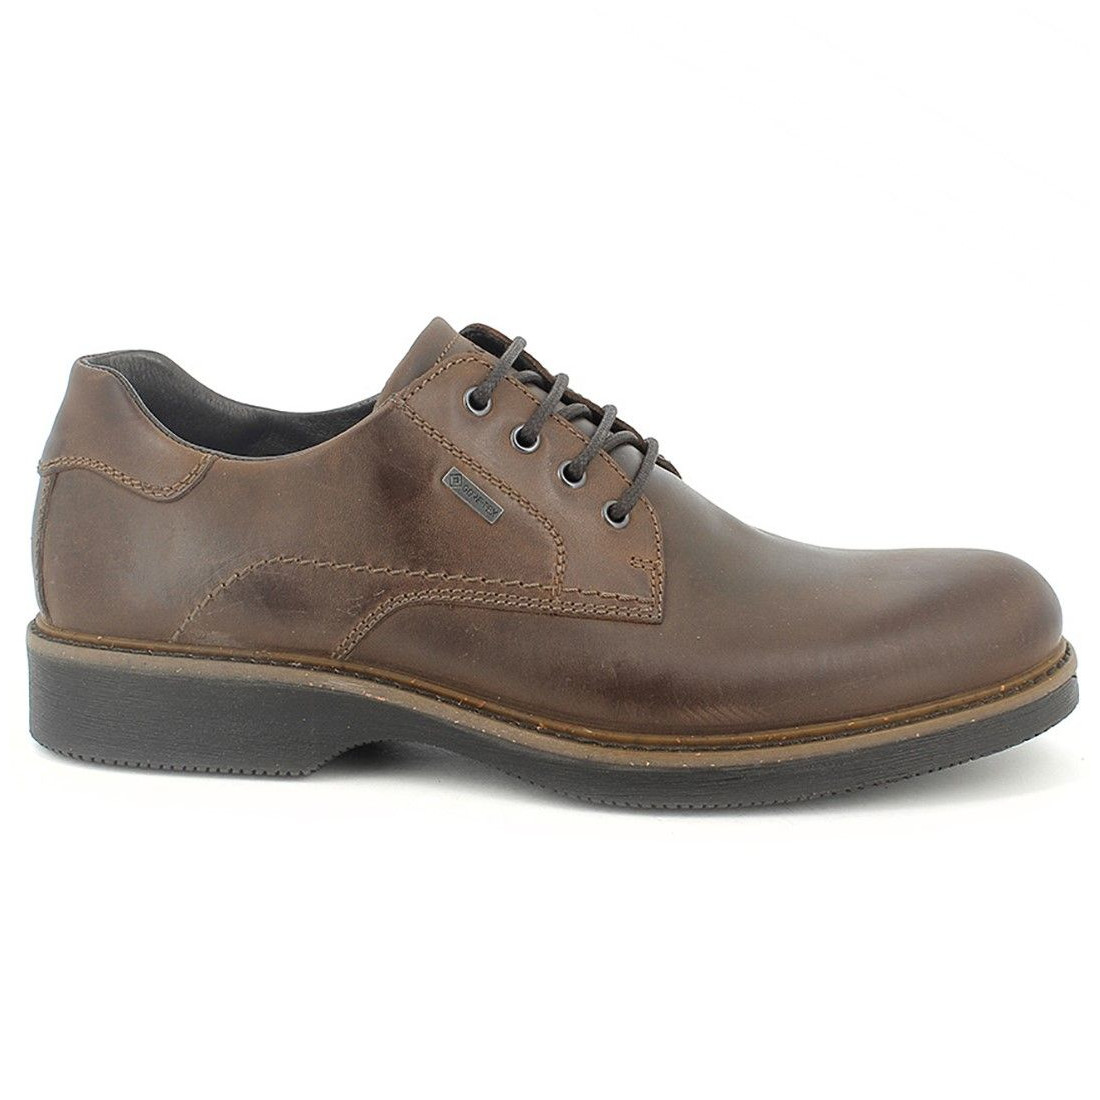 Igi & Co men's derby shoes in brown leather with gore-tex